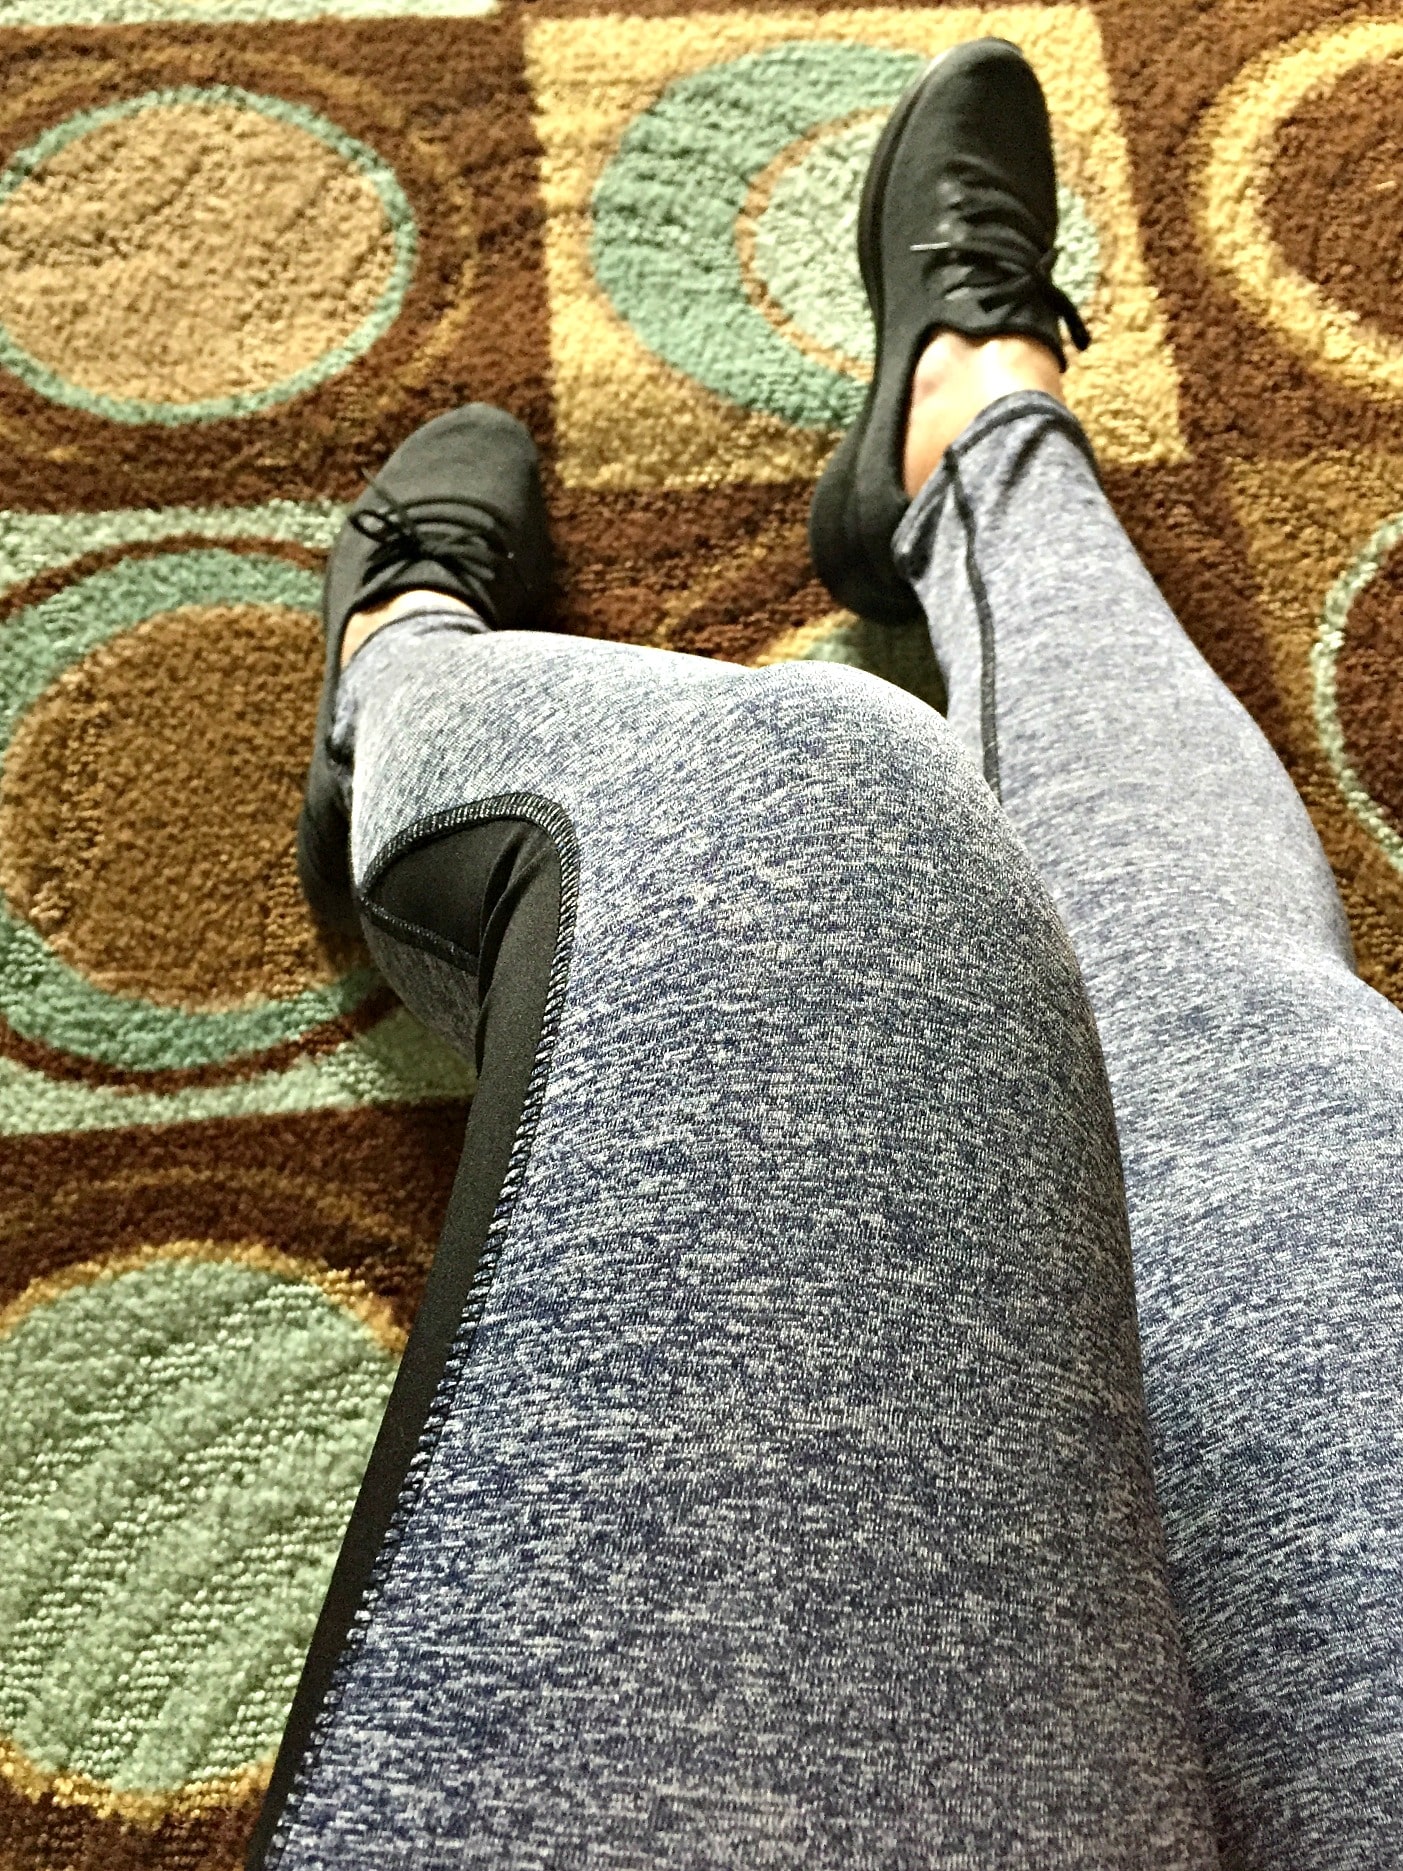 A few of my favorite things from Amazon yoga pants legging and Sketcher's Women's Go Walk 4 sneakers